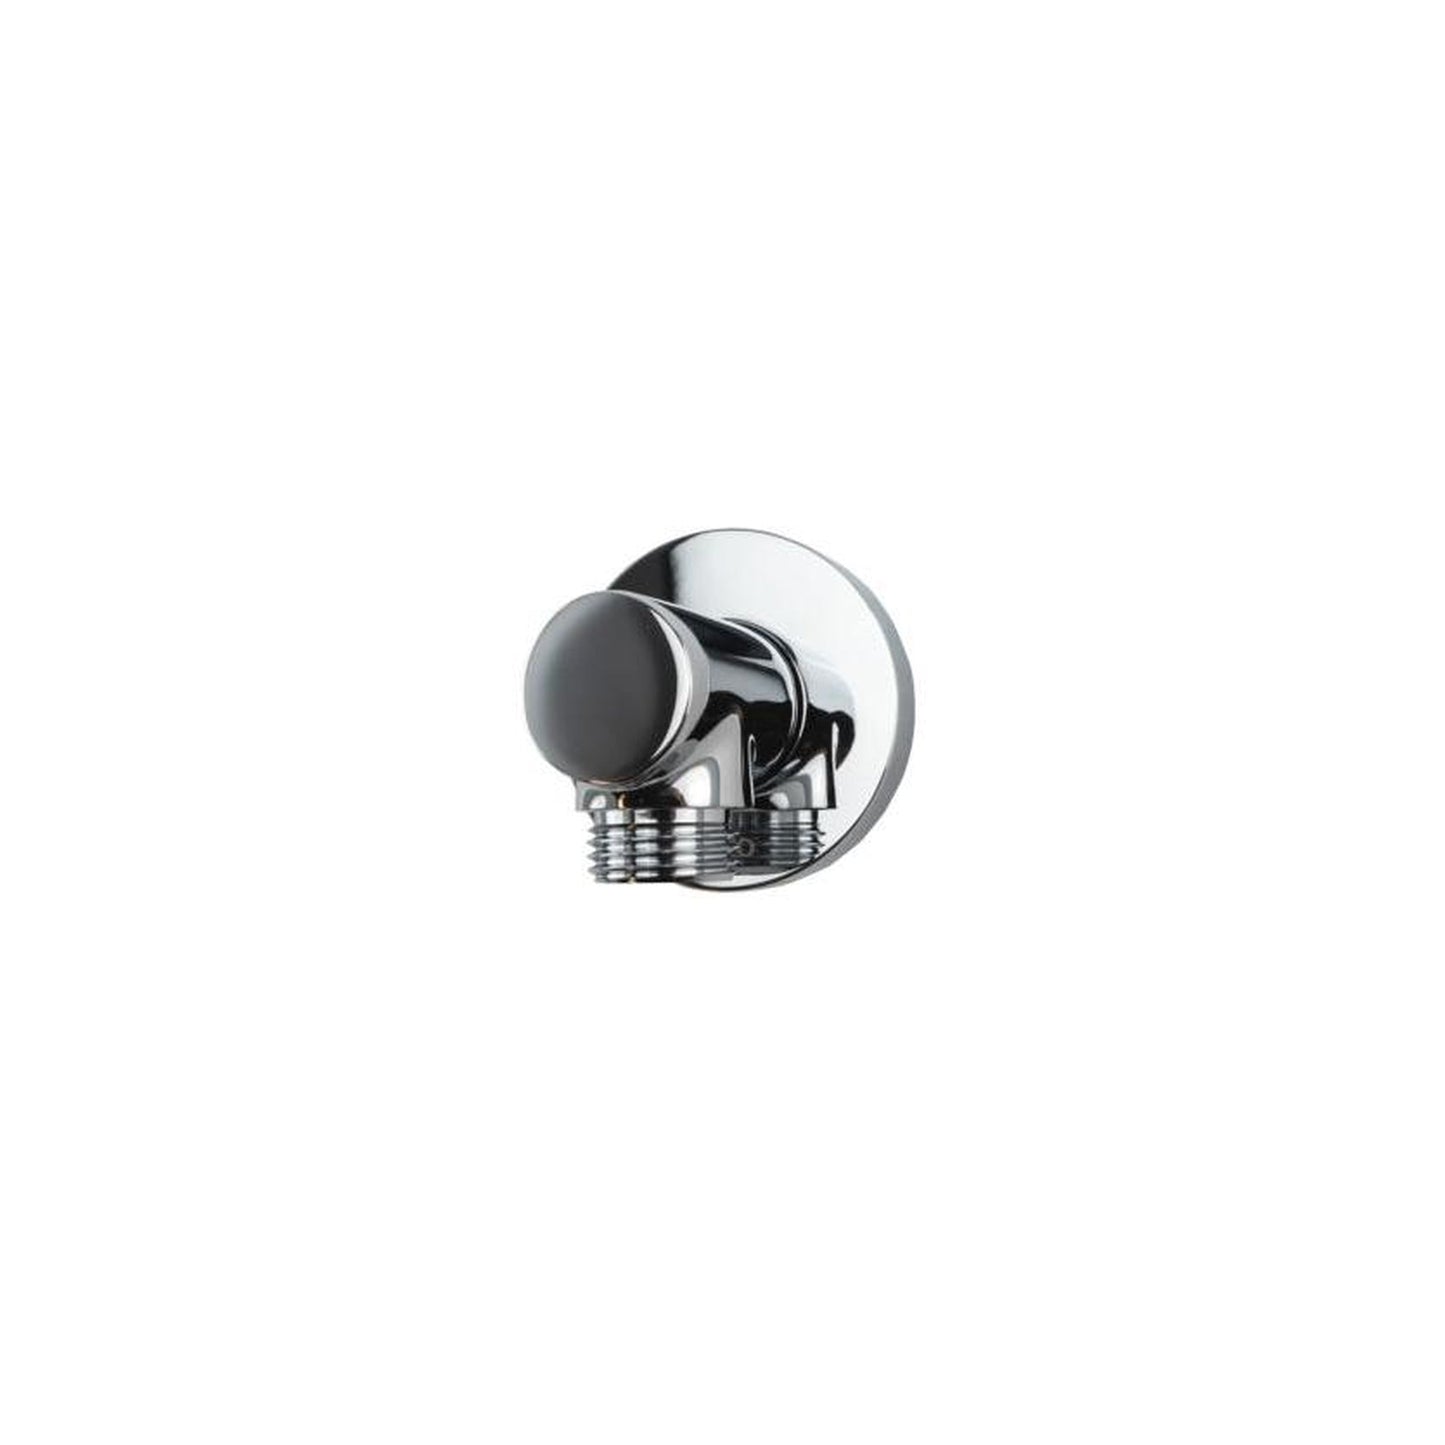 Toto Wall-Outlet, Round Polished Chrome